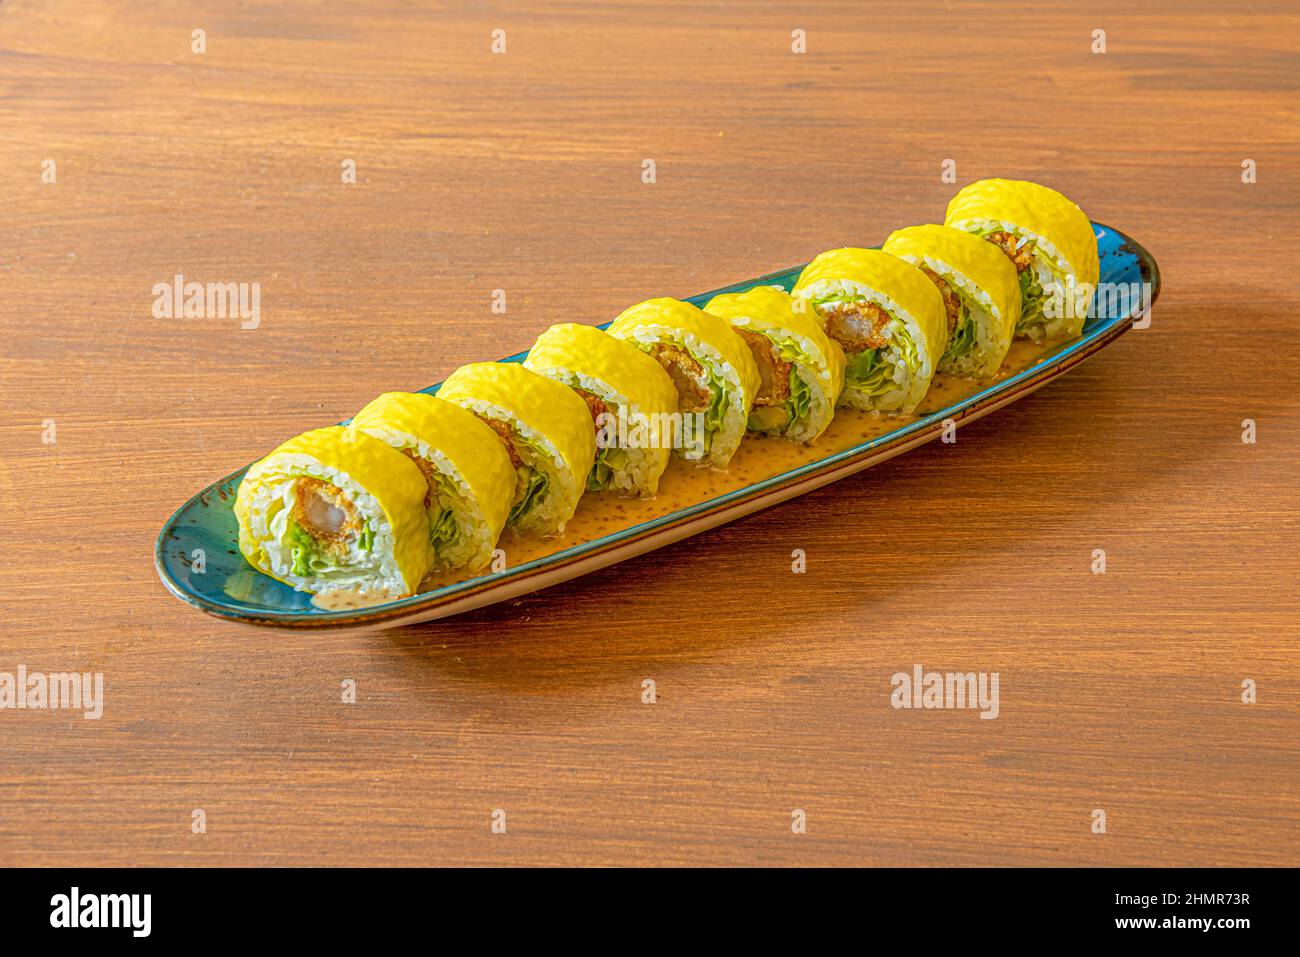 makis of vegetable slices. Sushi rolls filled with a tasty combination of quality ingredients, covered with colored vegetable slices Stock Photo